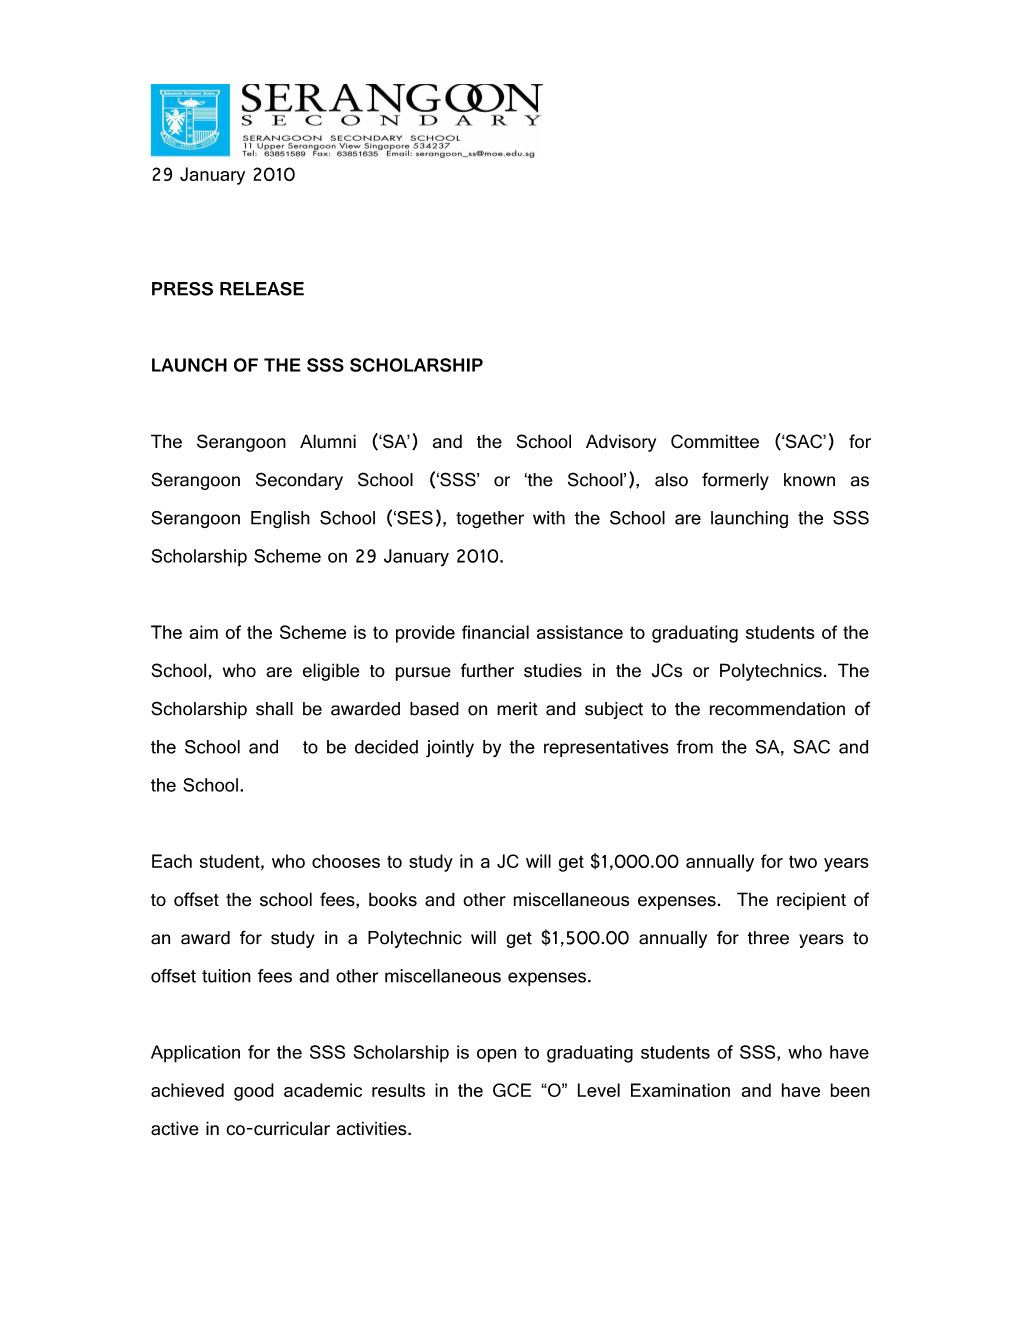 Press Release on the Launch of the Sss Scholarship Fund